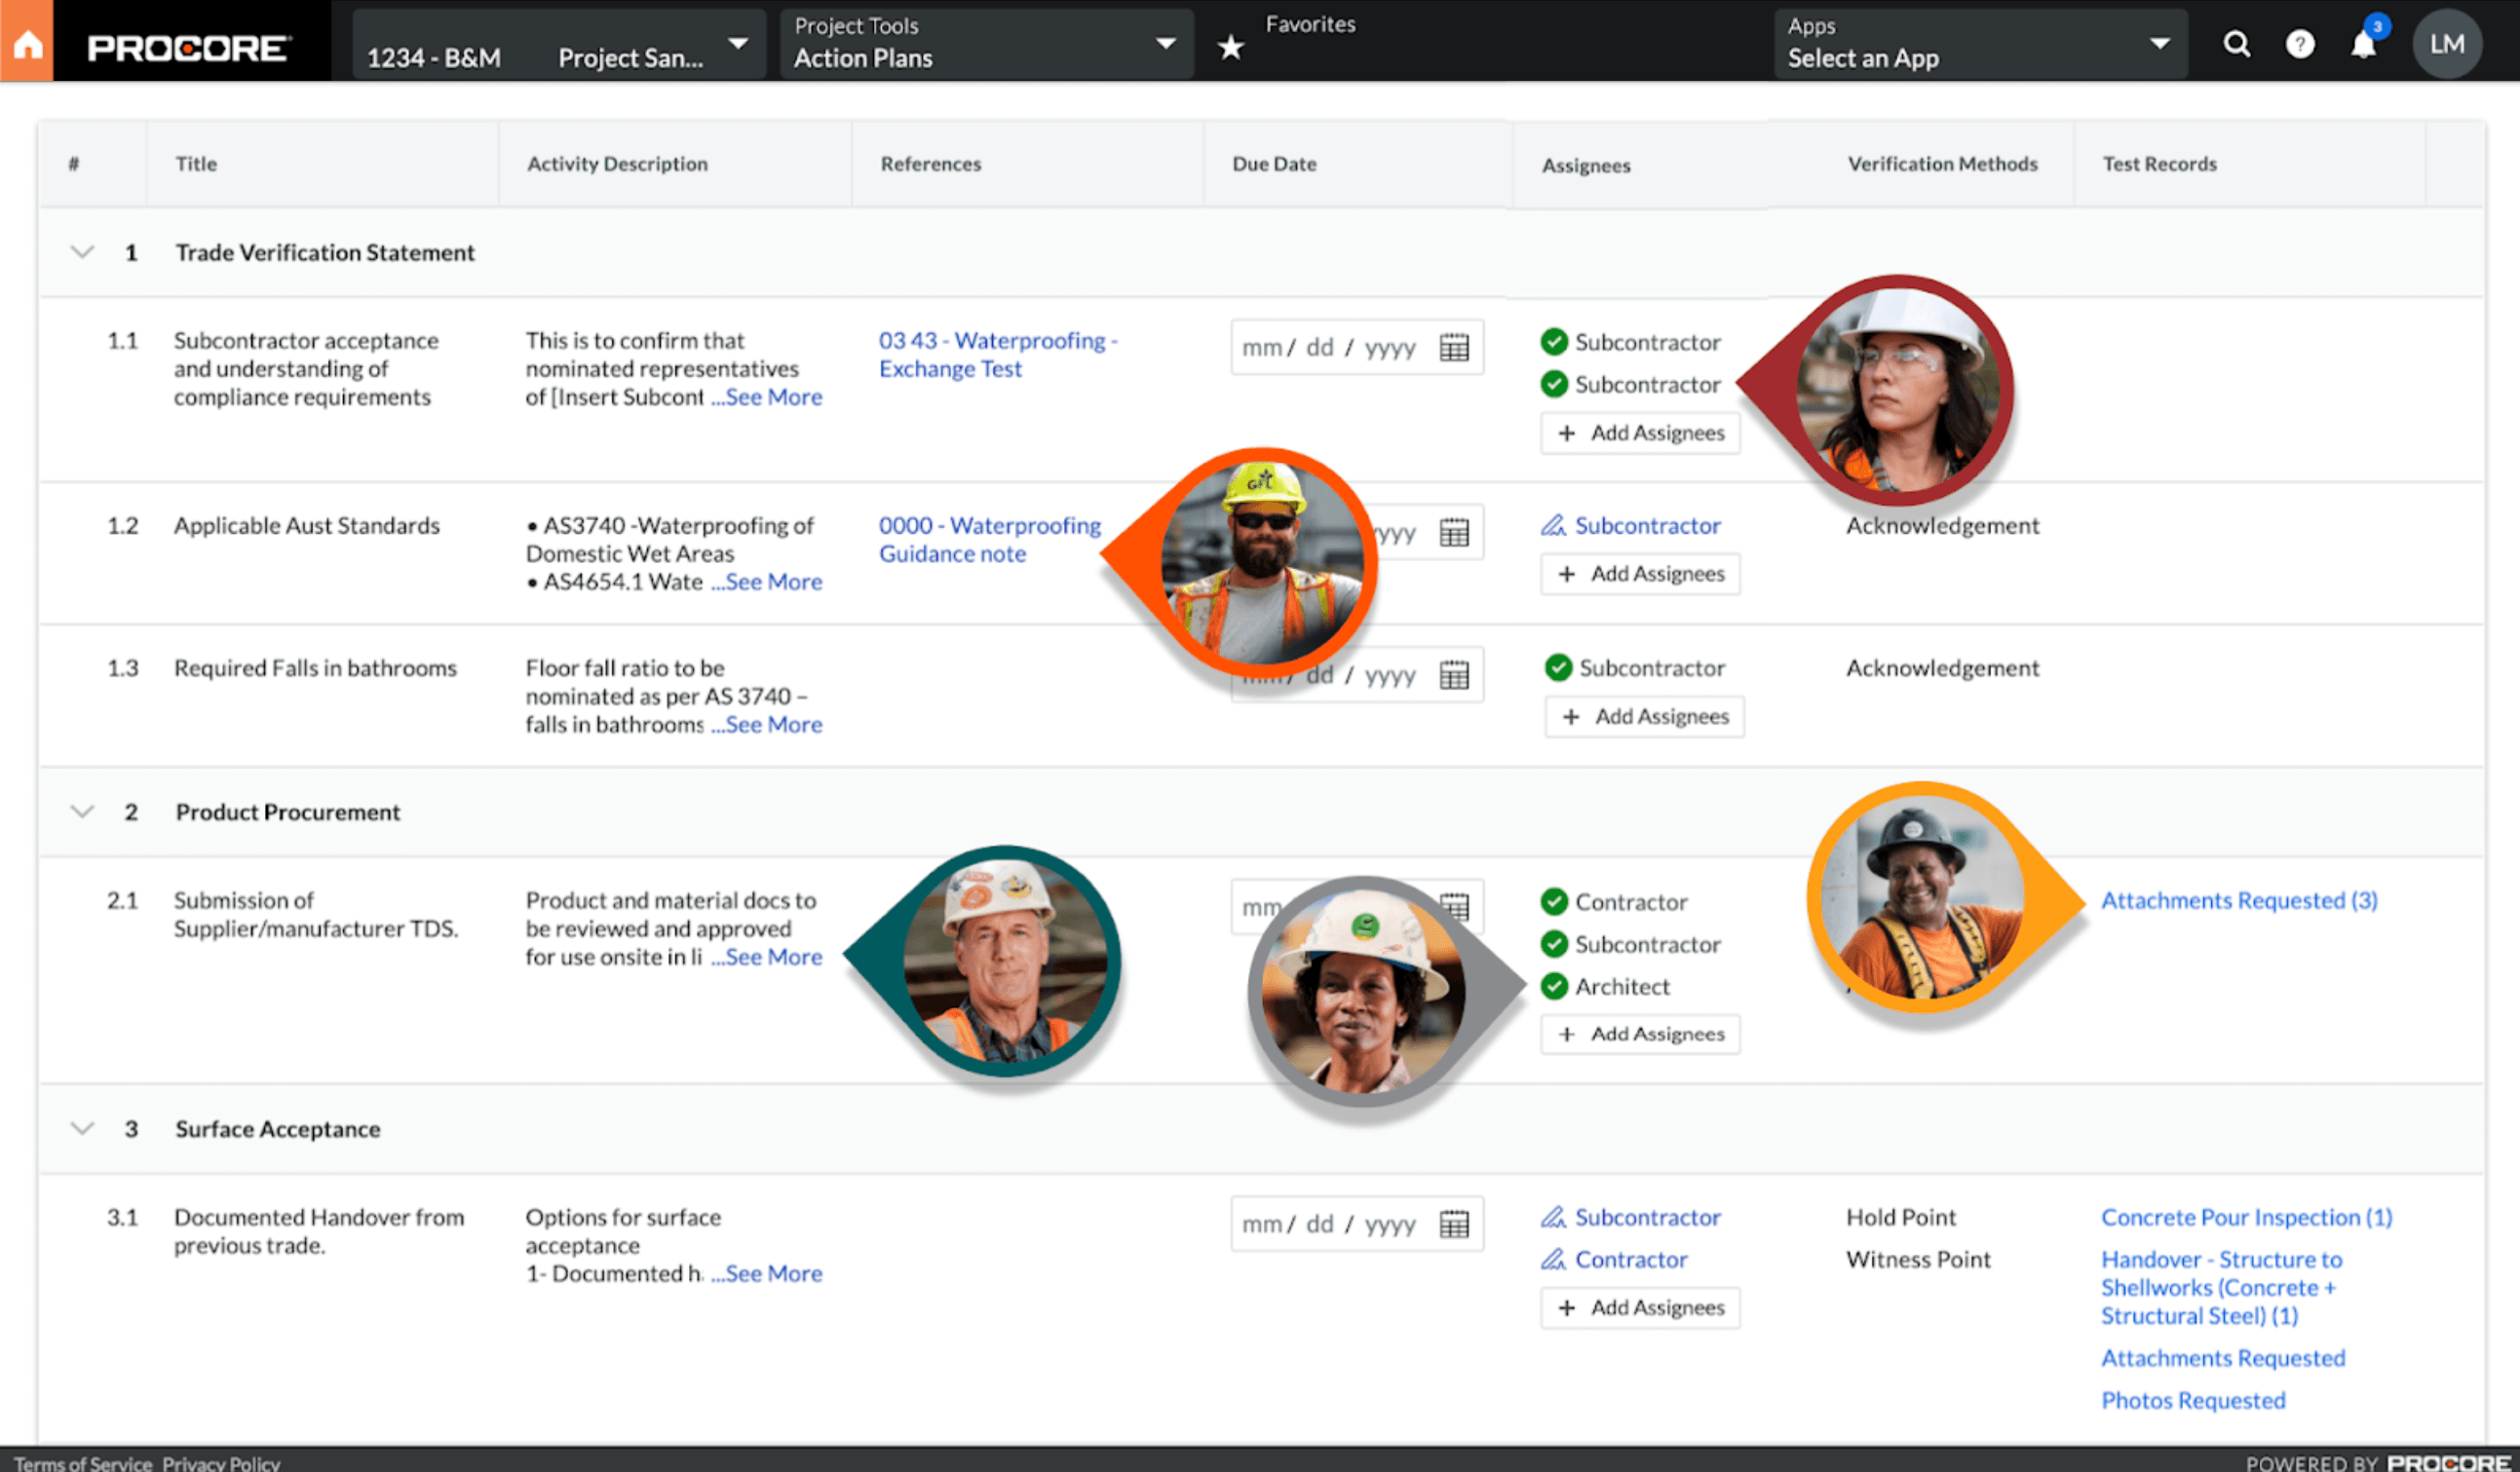 Procore UI with persona headshots illustrating a connected platform